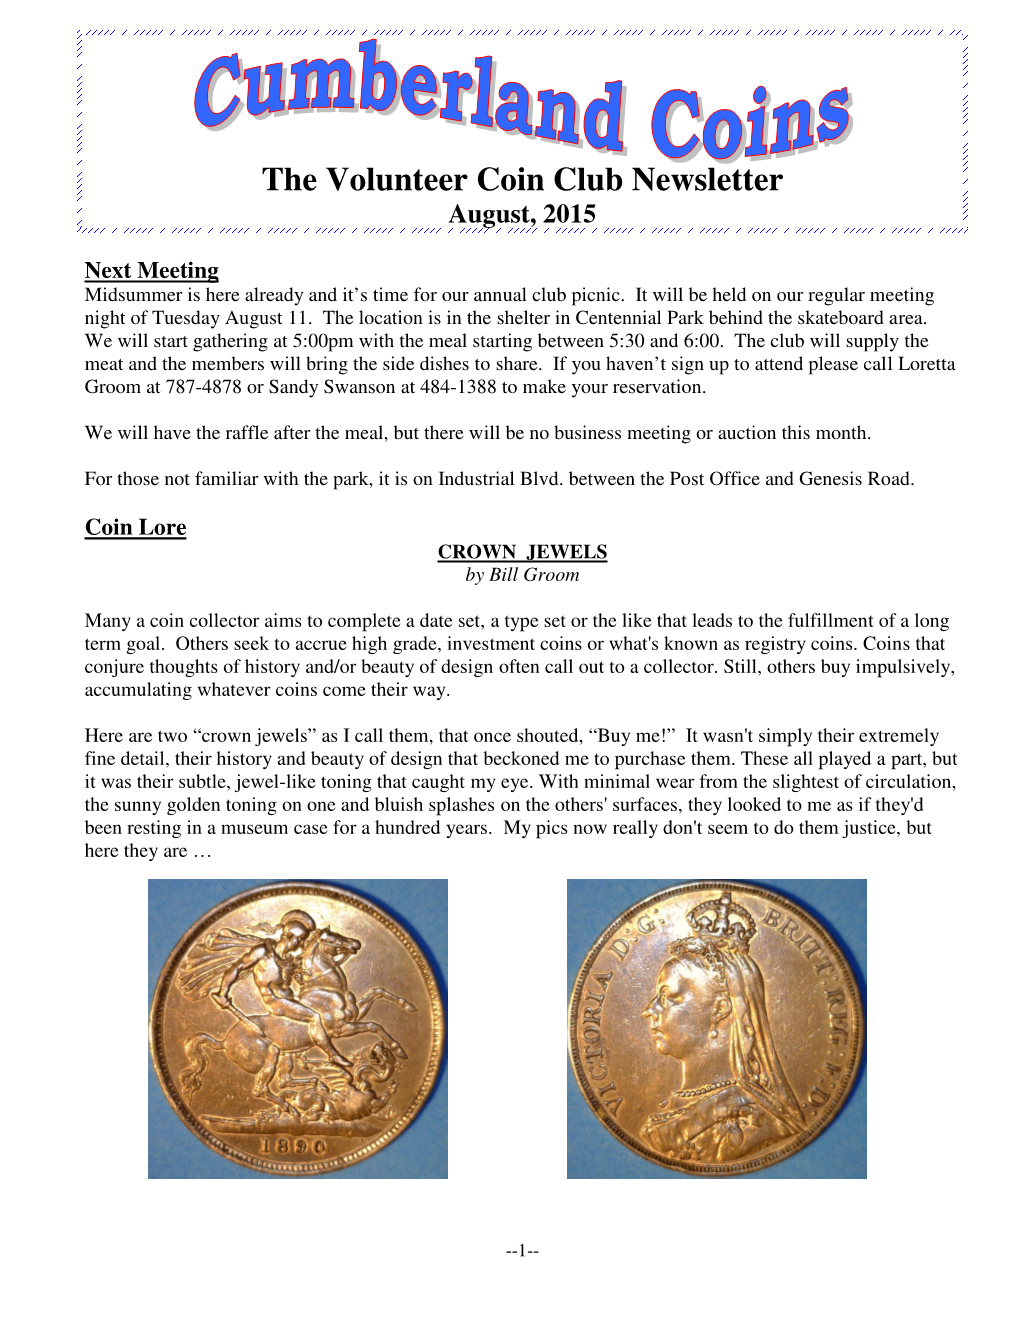 The Volunteer Coin Club Newsletter August, 2015